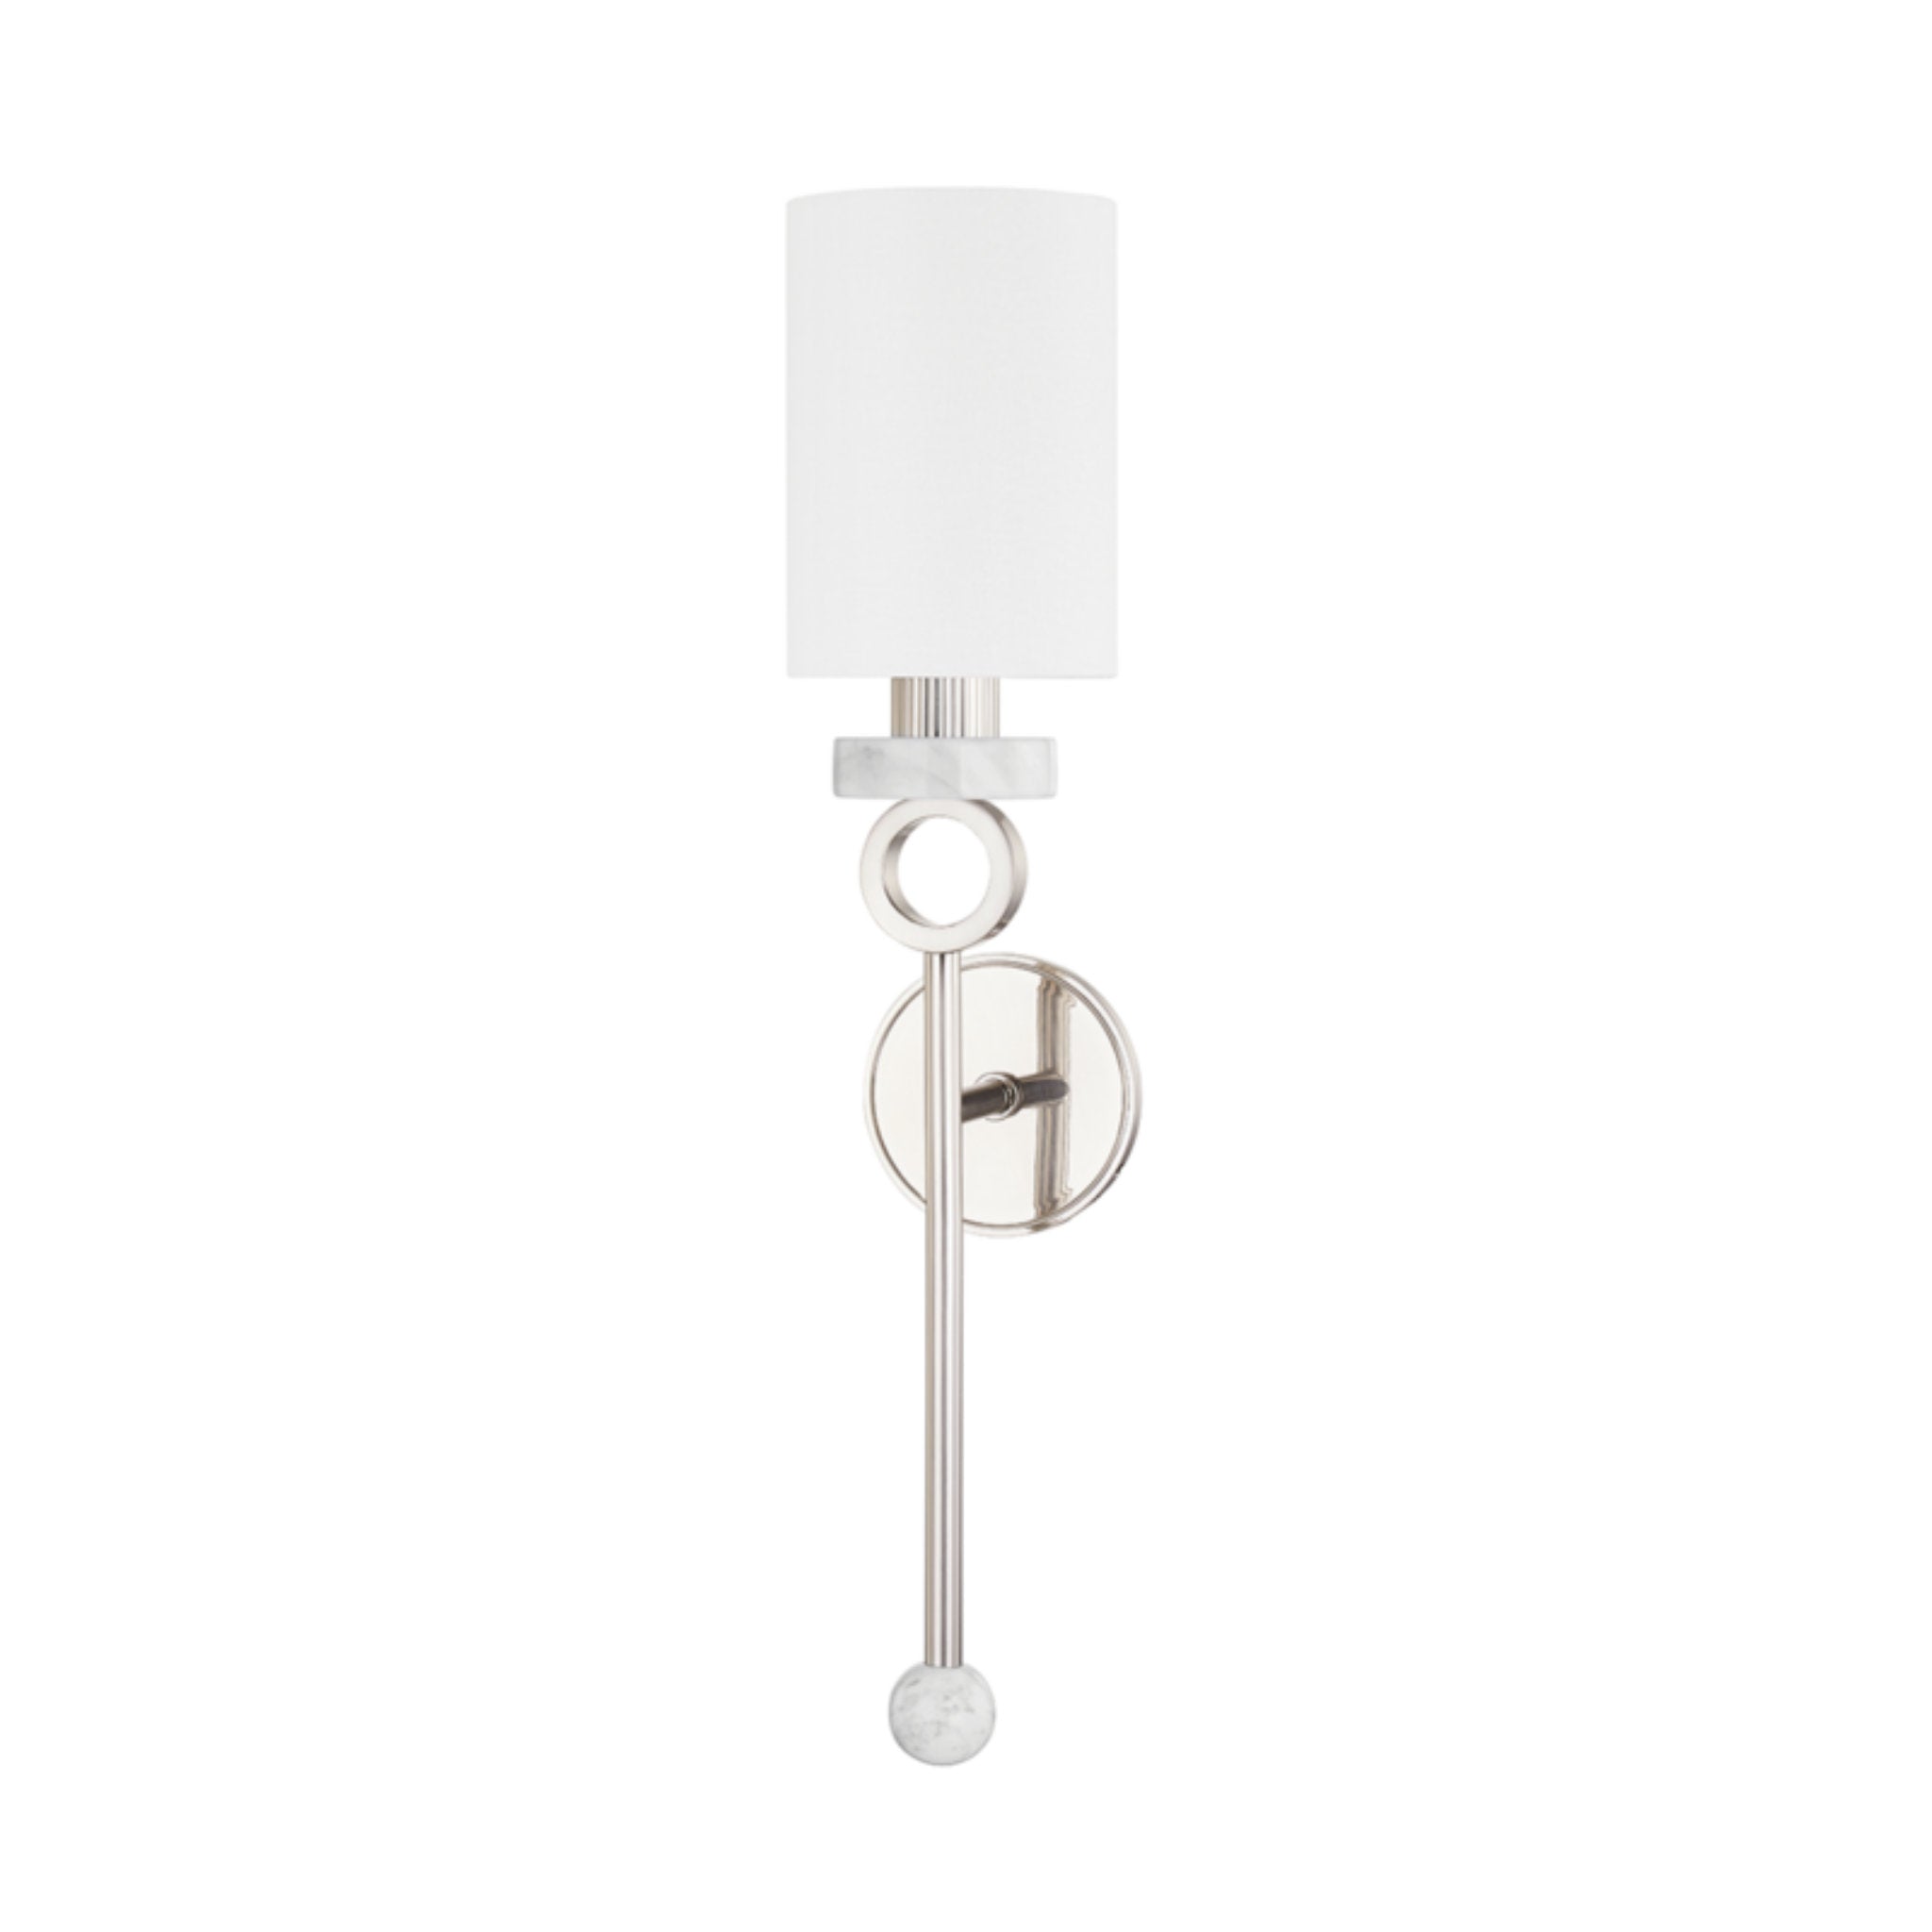 Haru 1 Light Wall Sconce in Burnished Nickel